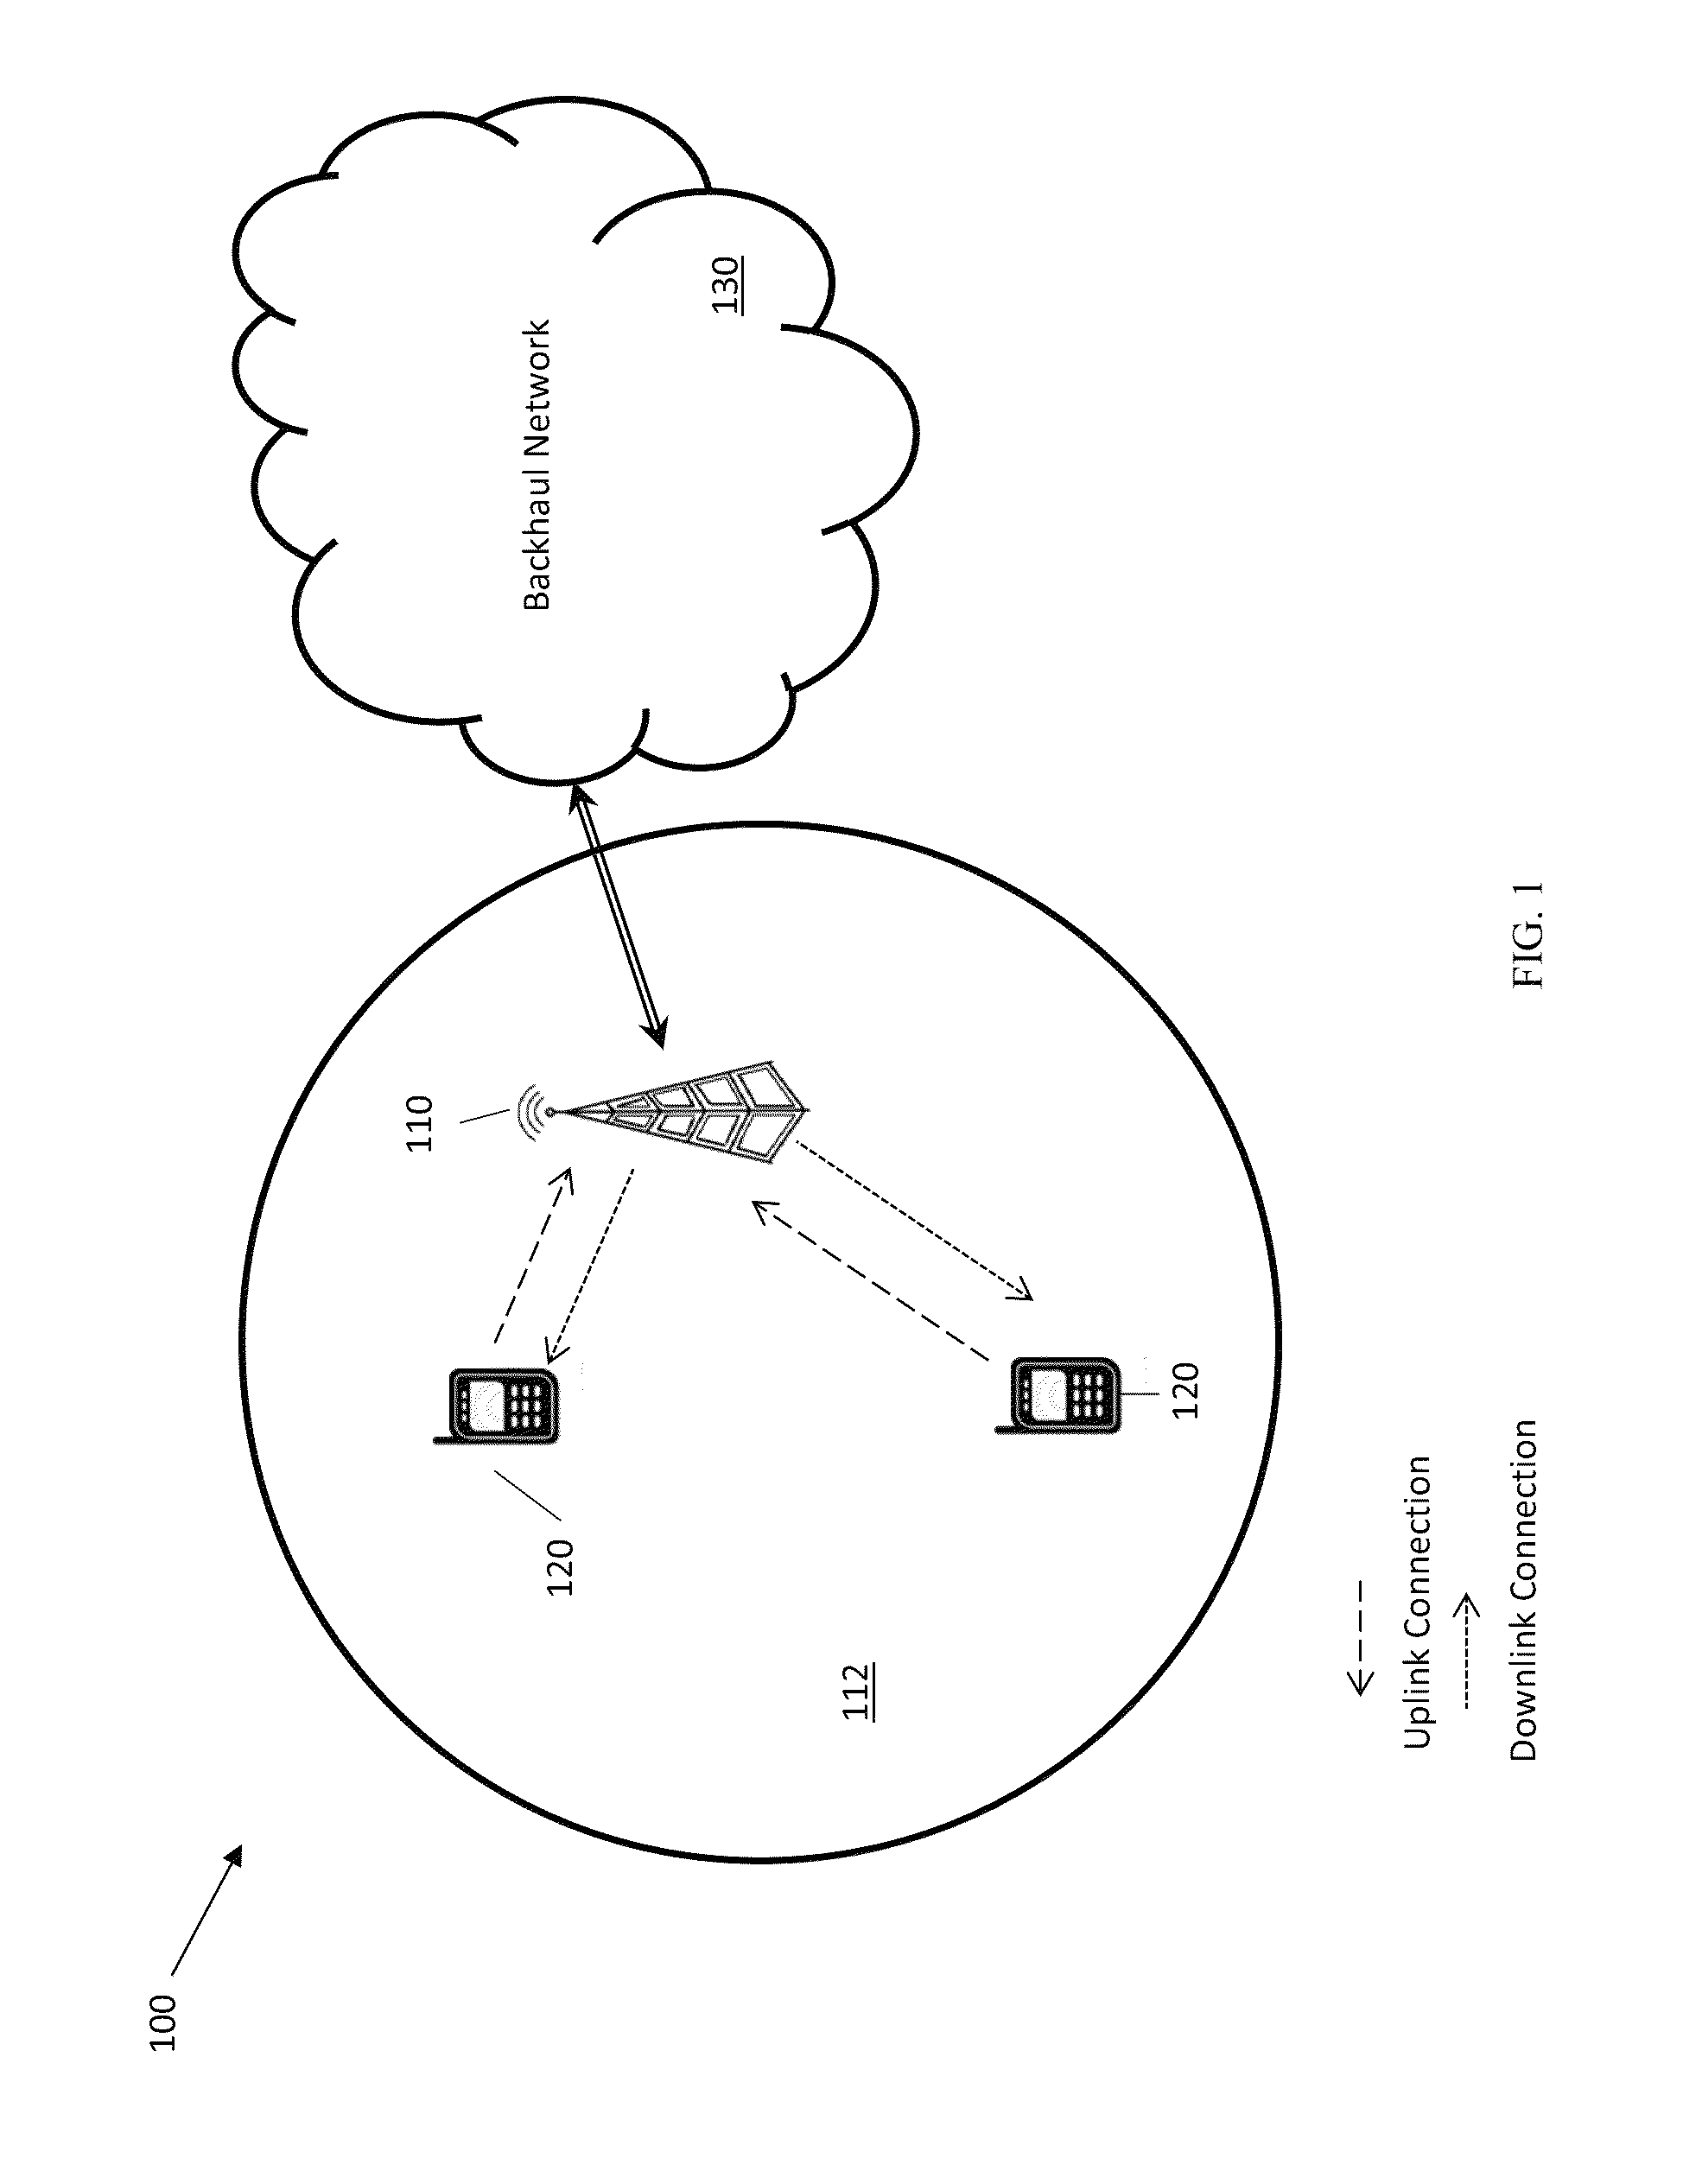 Coordinated multipoint (COMP) techniques for reducing downlink interference from uplink signals